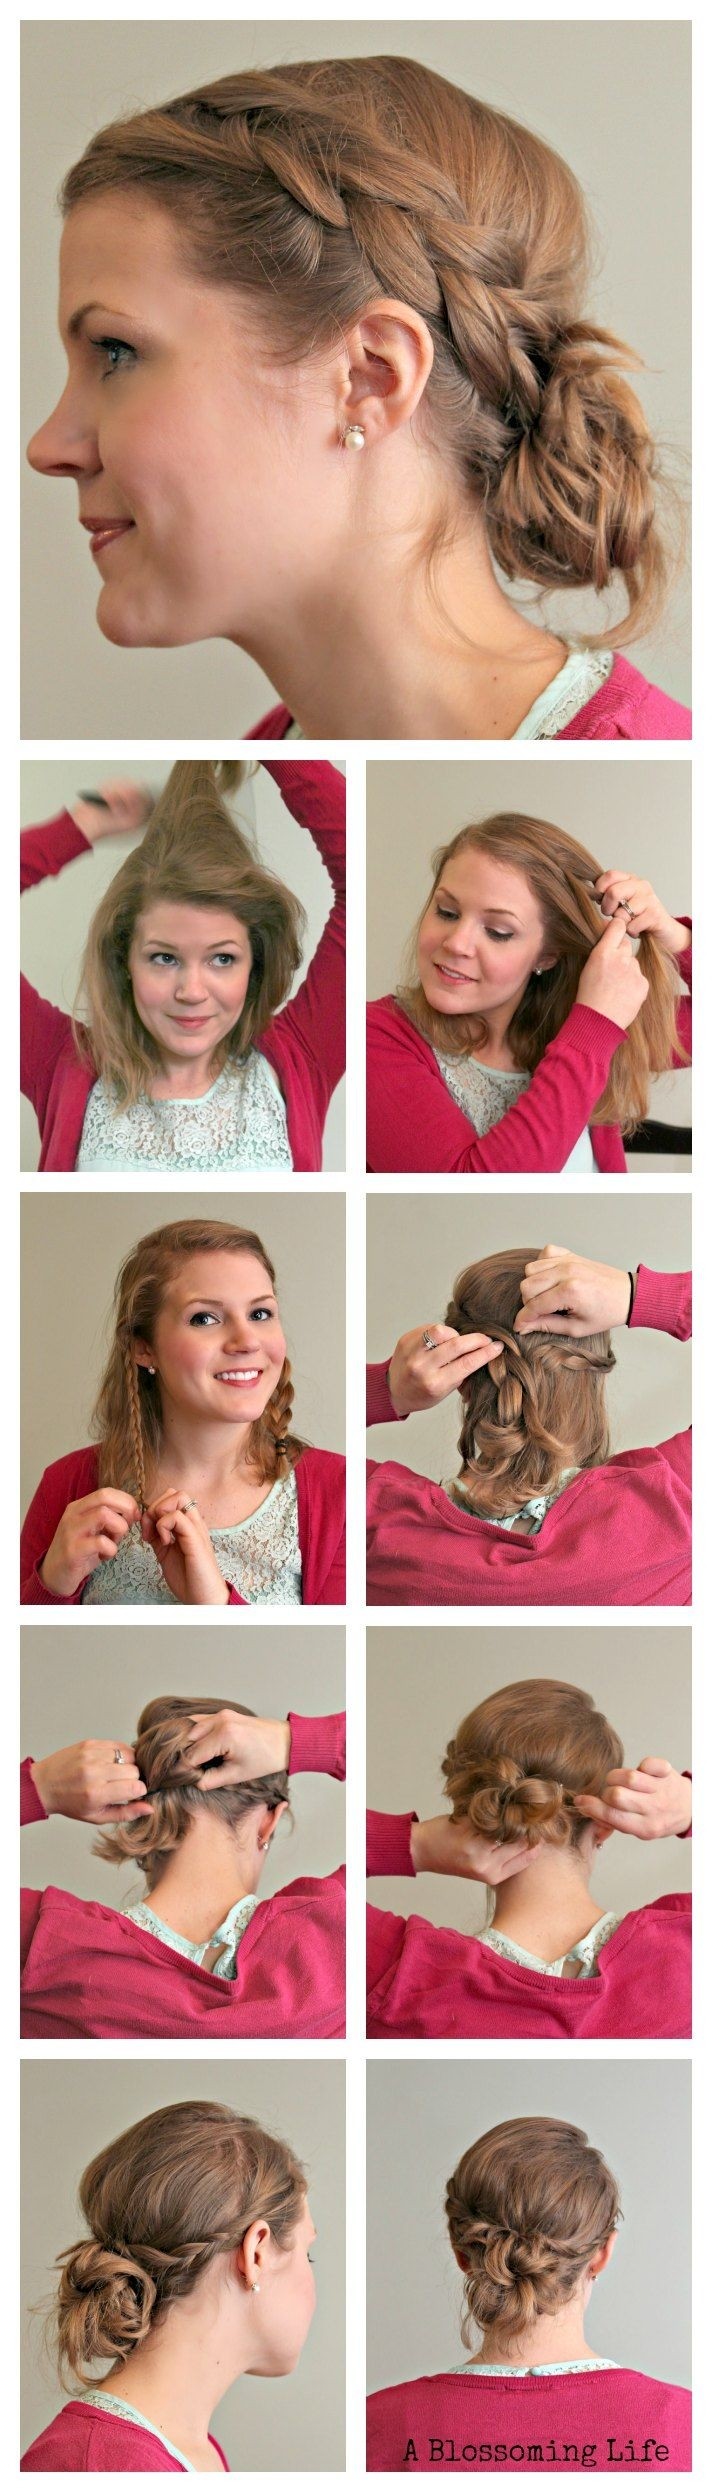 2014 Prom Hairstyles: Loosely Braided Messy Bun Tutorial